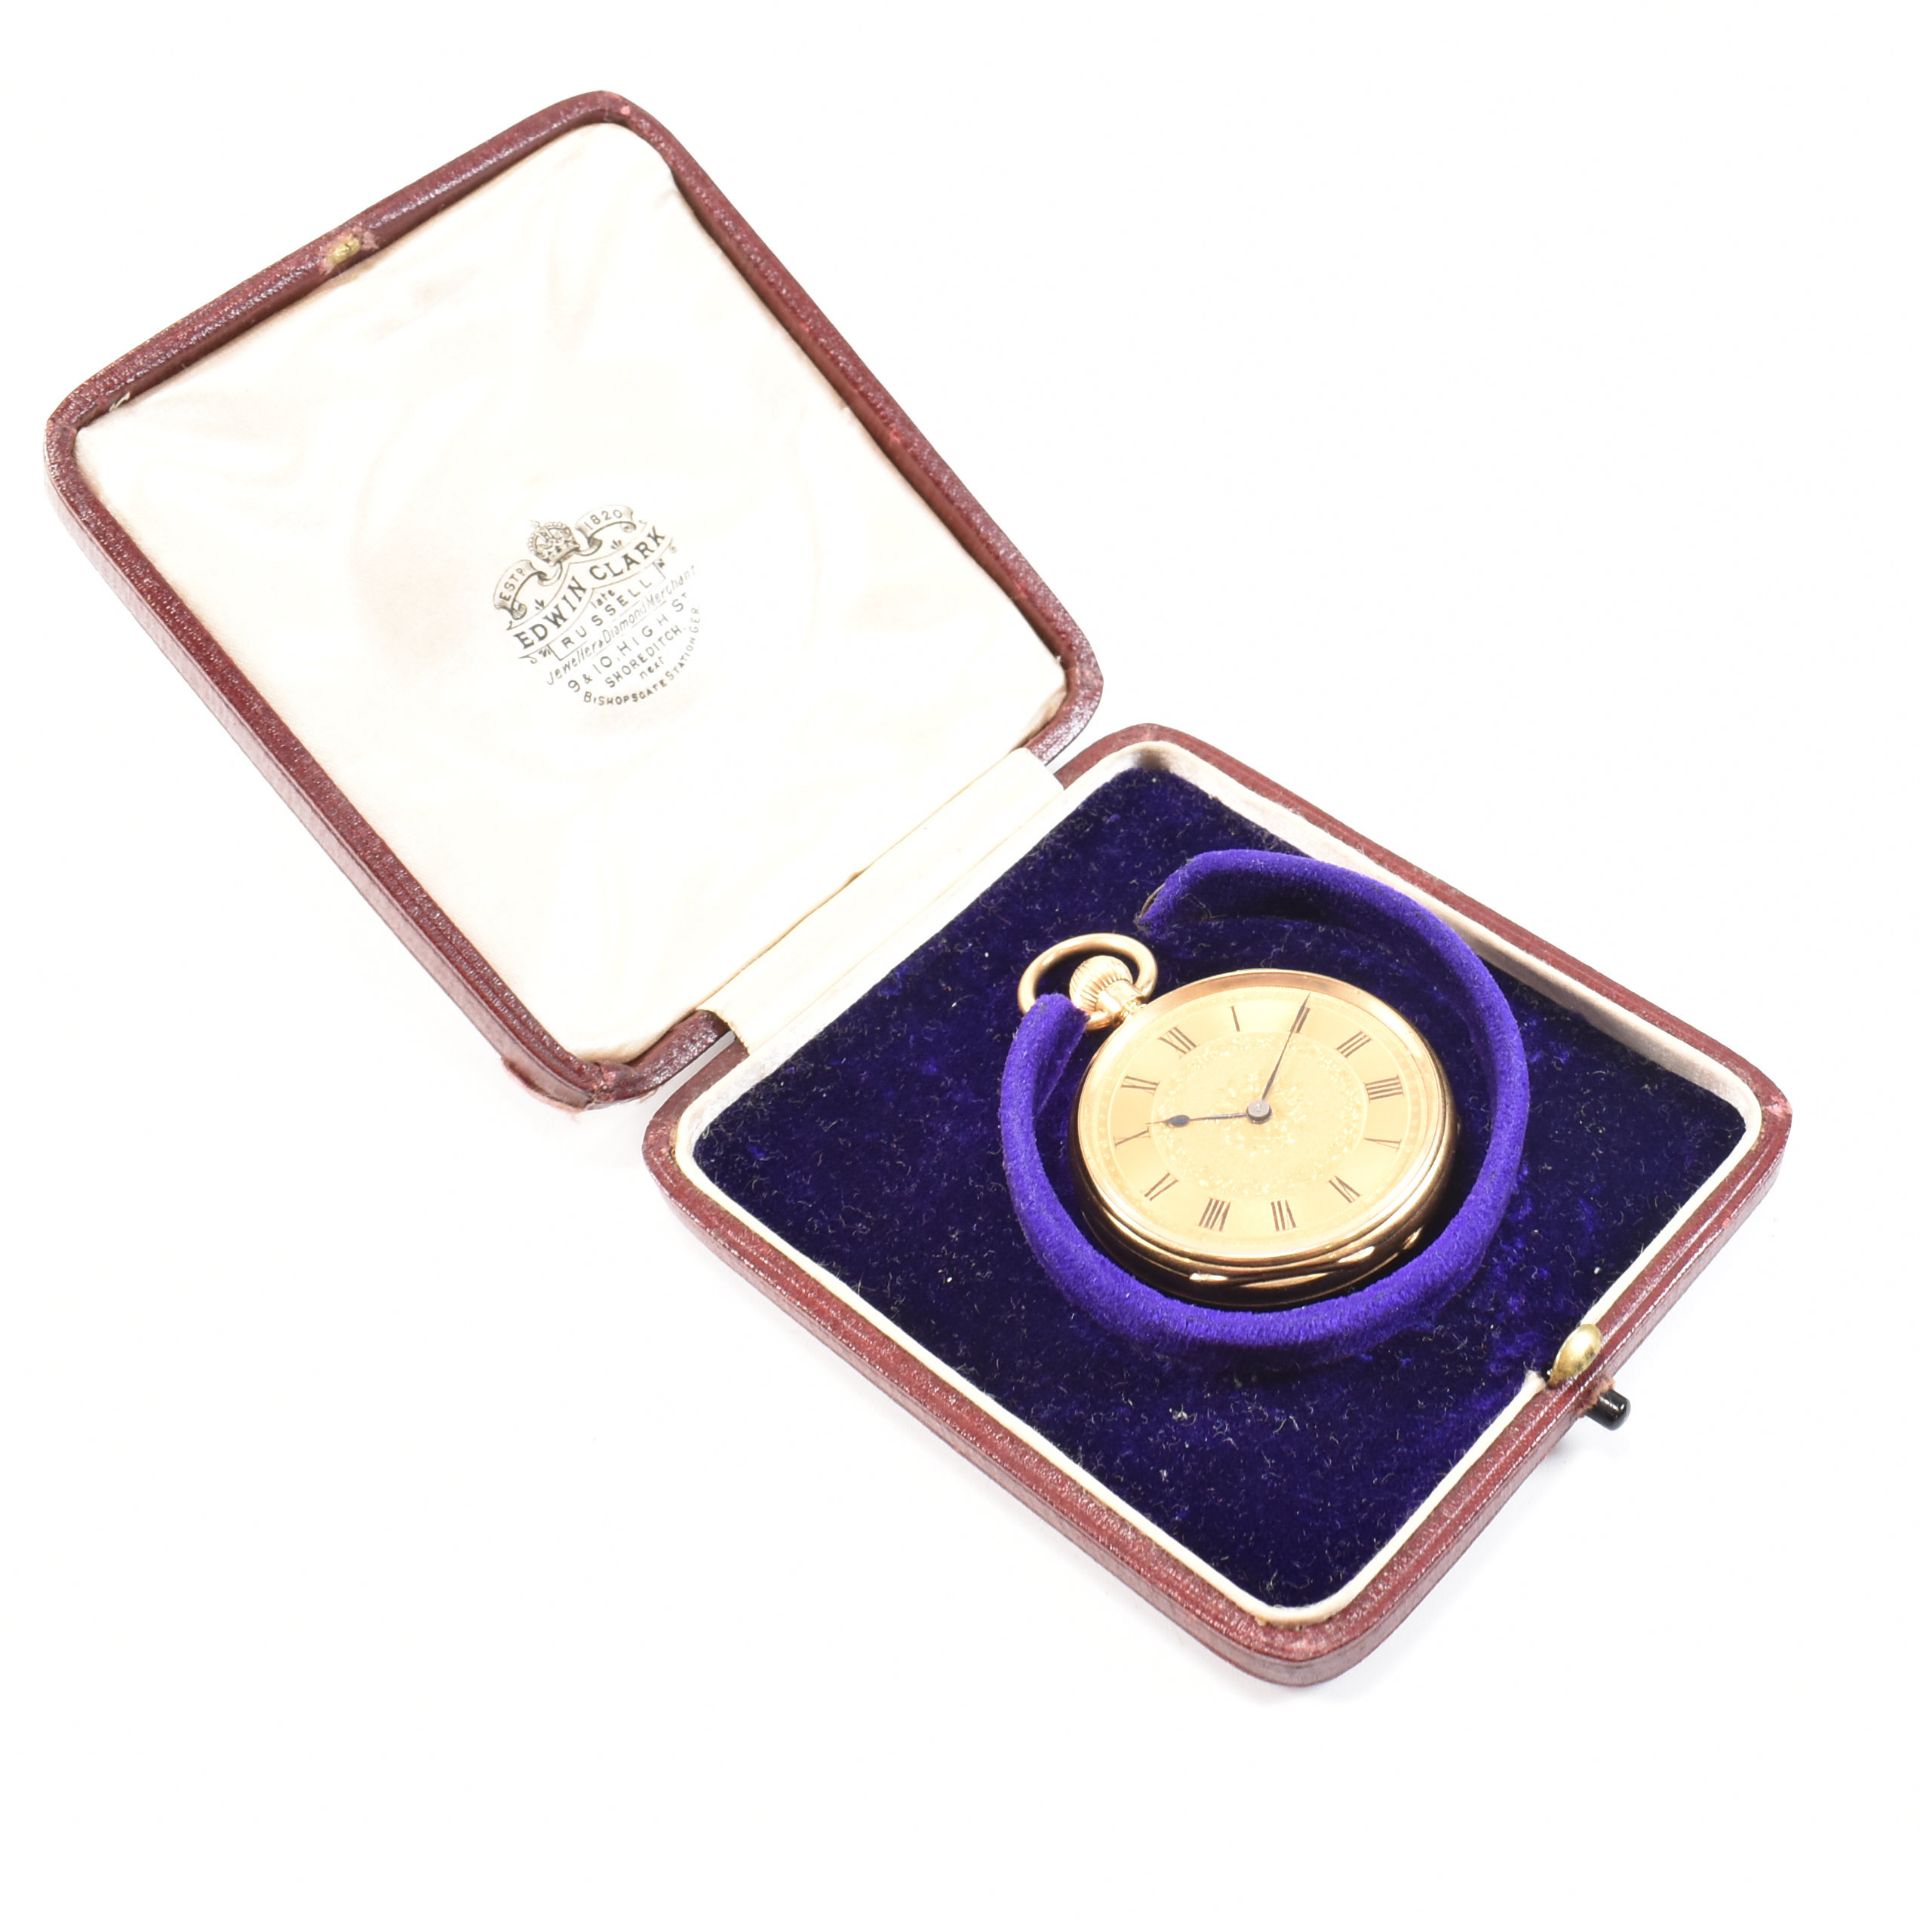 HALLMARKED 18CT GOLD OPEN FACE POCKET WATCH. - Image 2 of 7